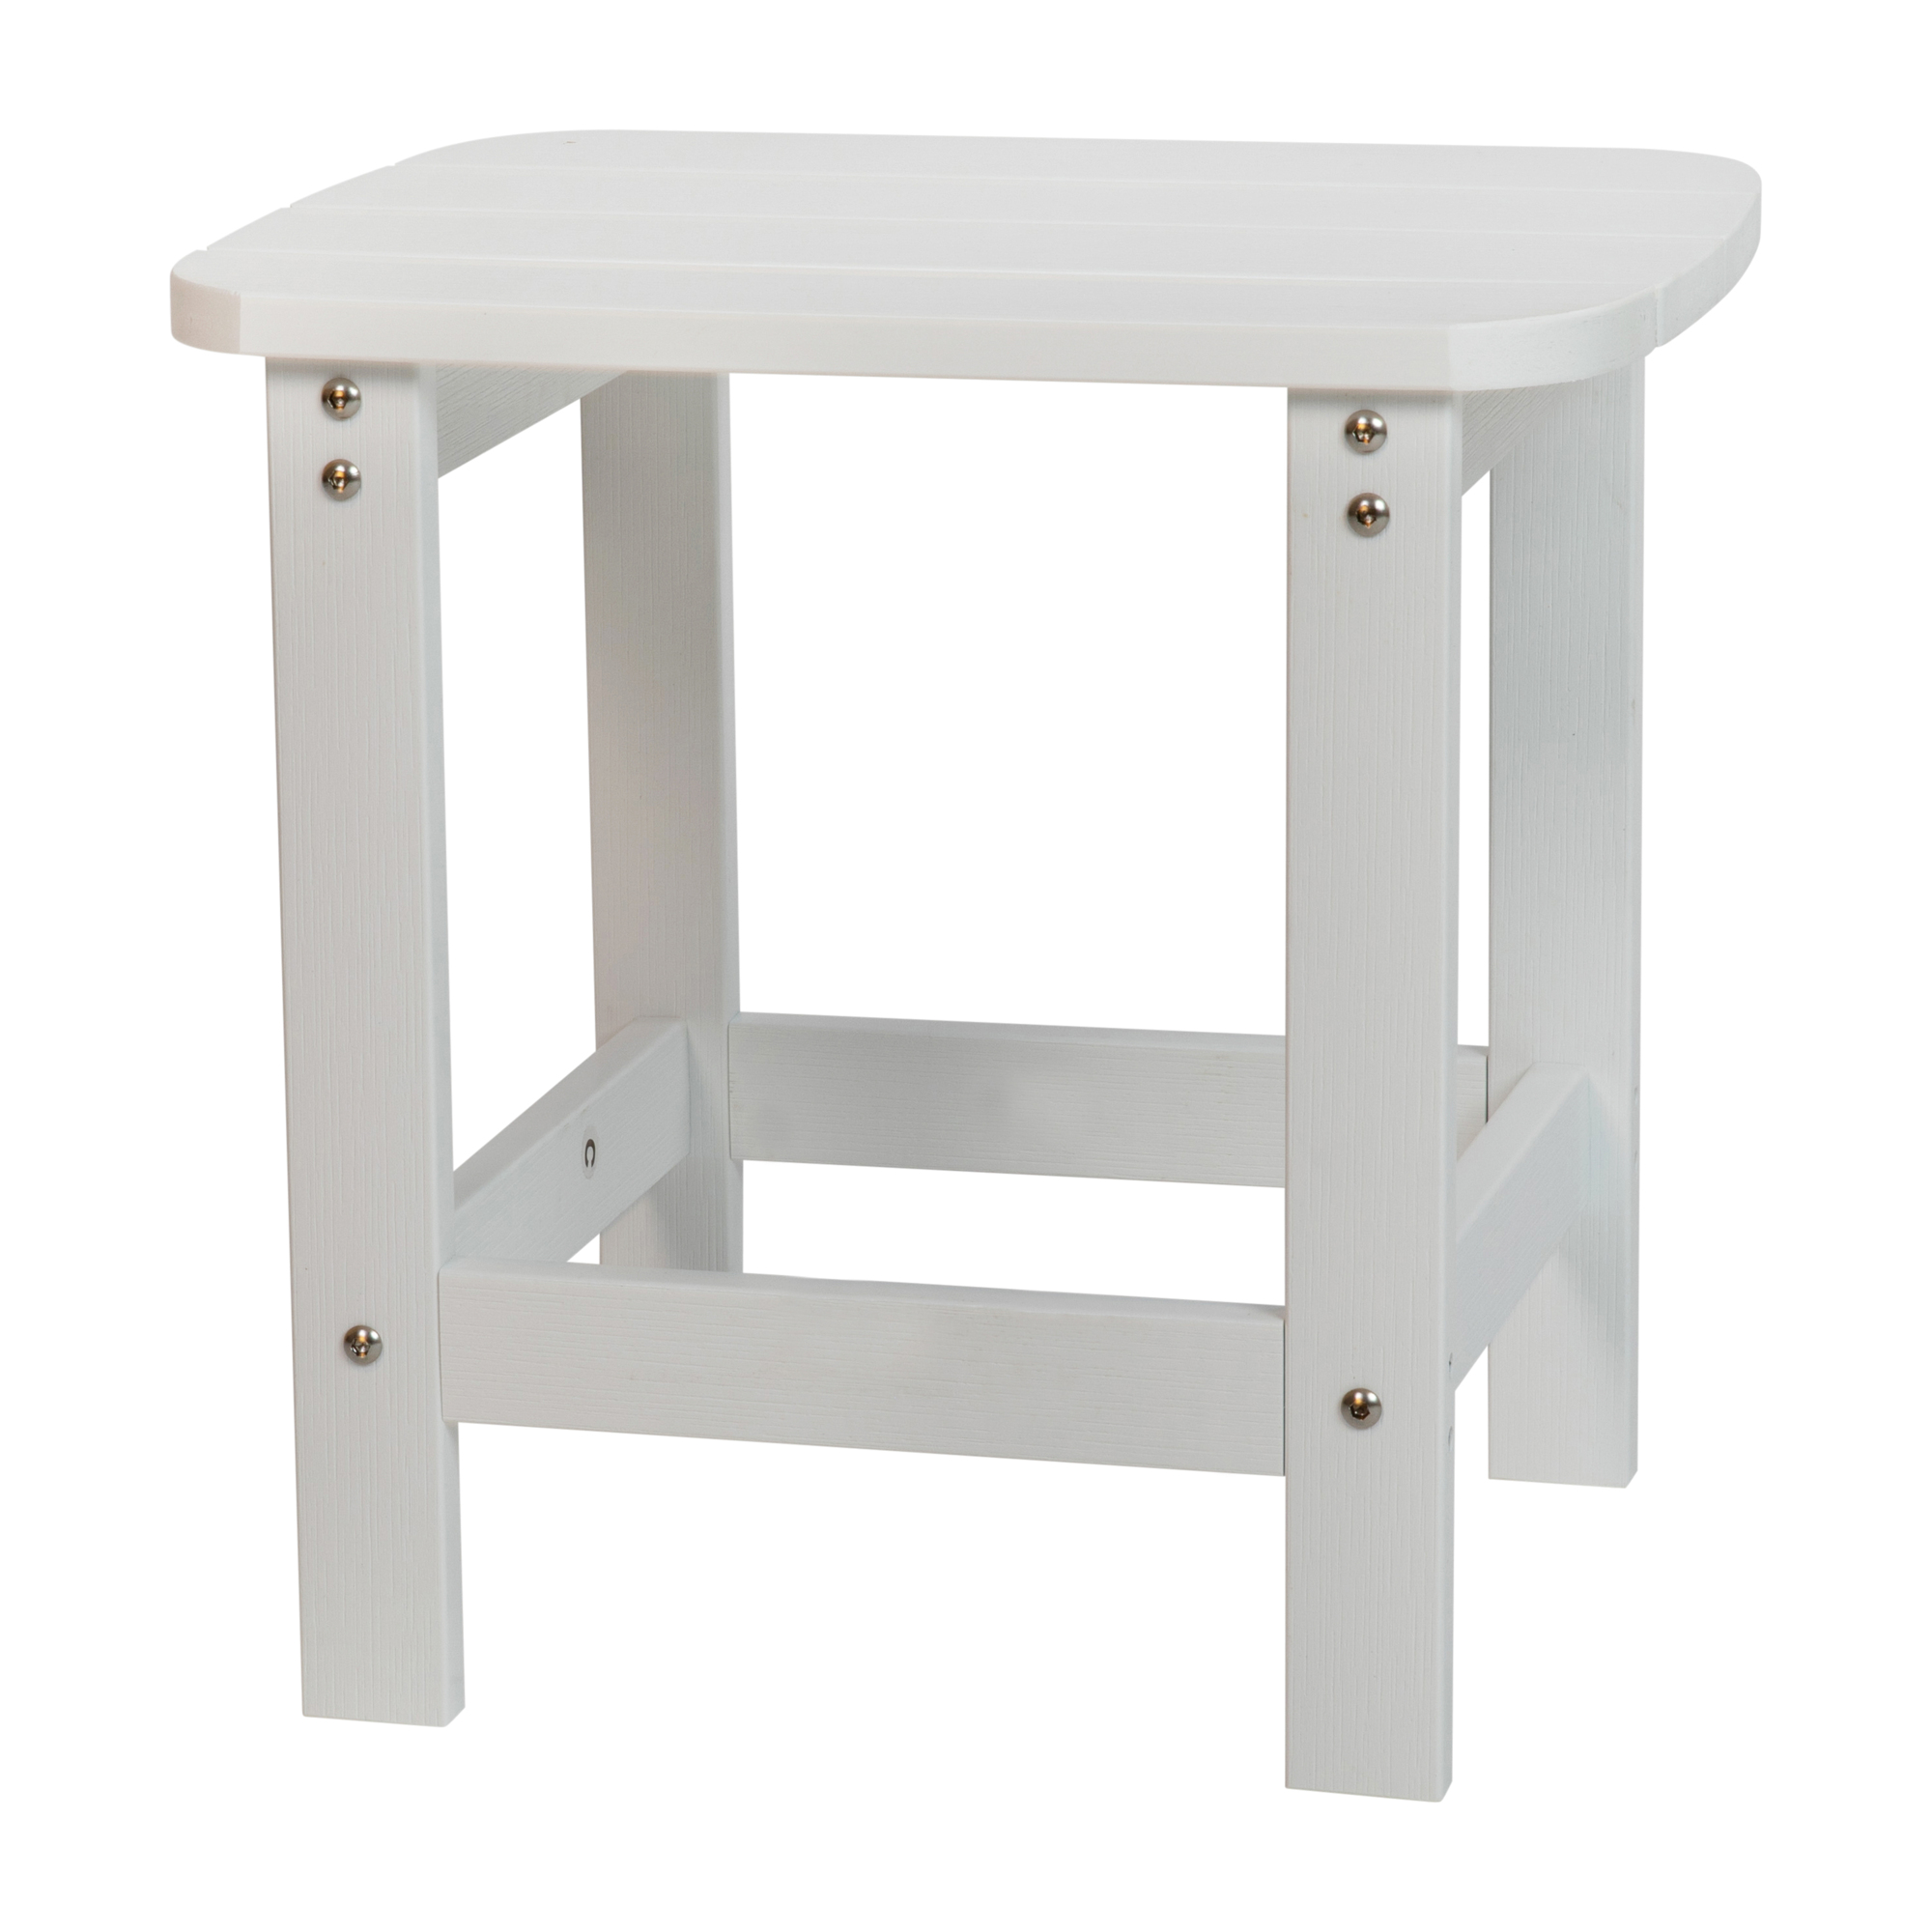 Flash Furniture, White All-Weather Adirondack Side Table, Table Shape Rectangle, Primary Color White, Height 18.25 in, Model JJT14001WH